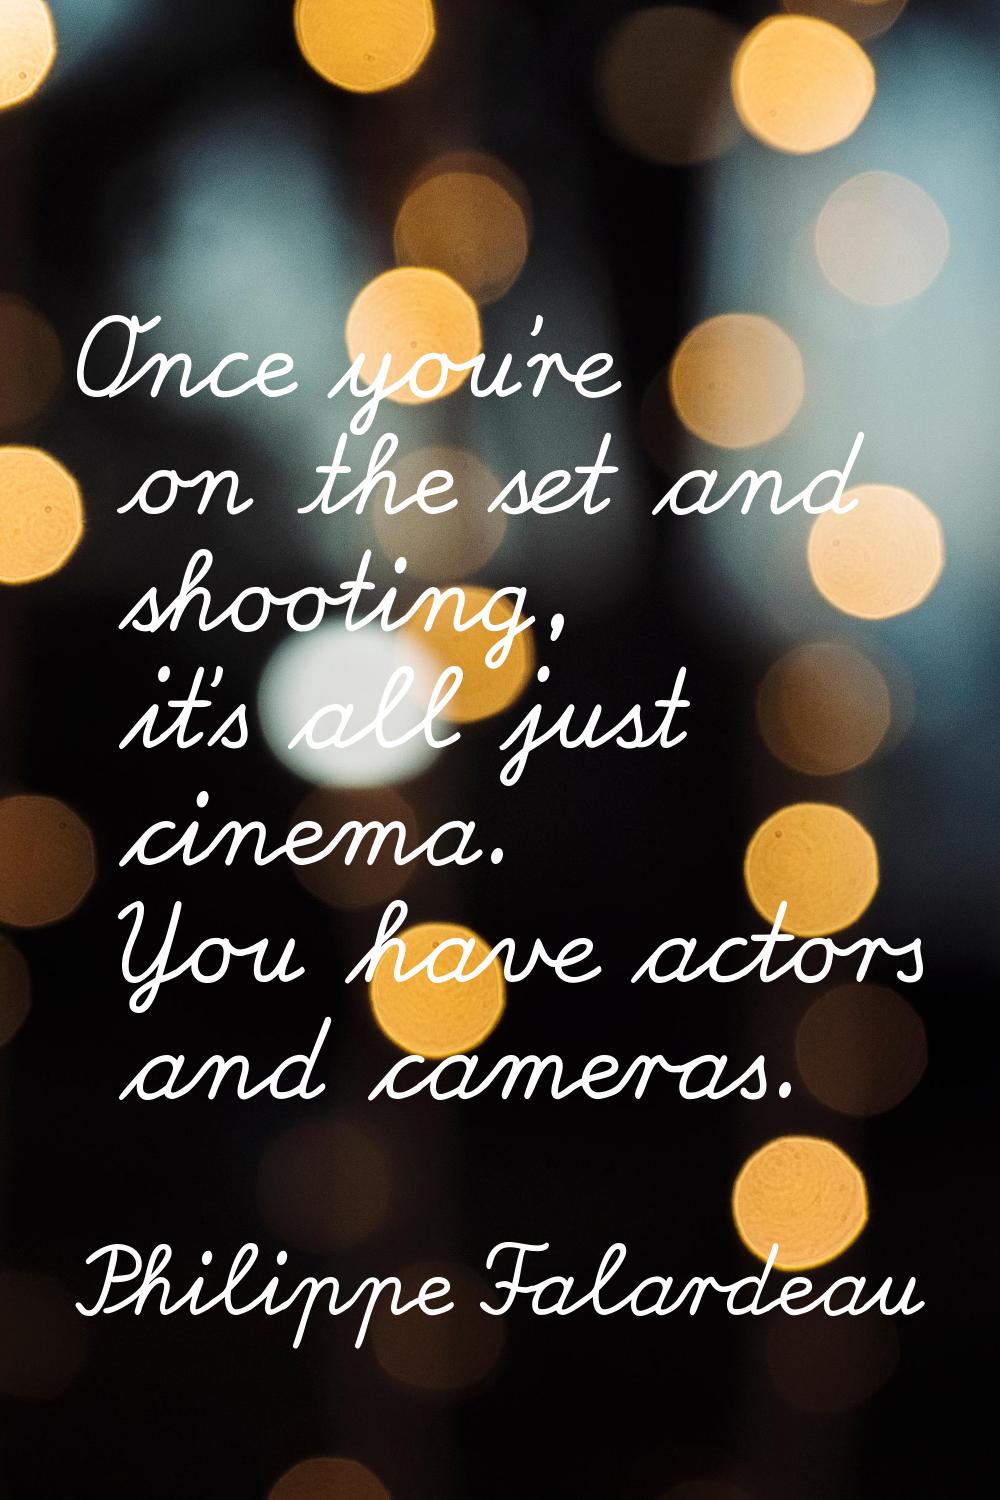 Once you're on the set and shooting, it's all just cinema. You have actors and cameras.